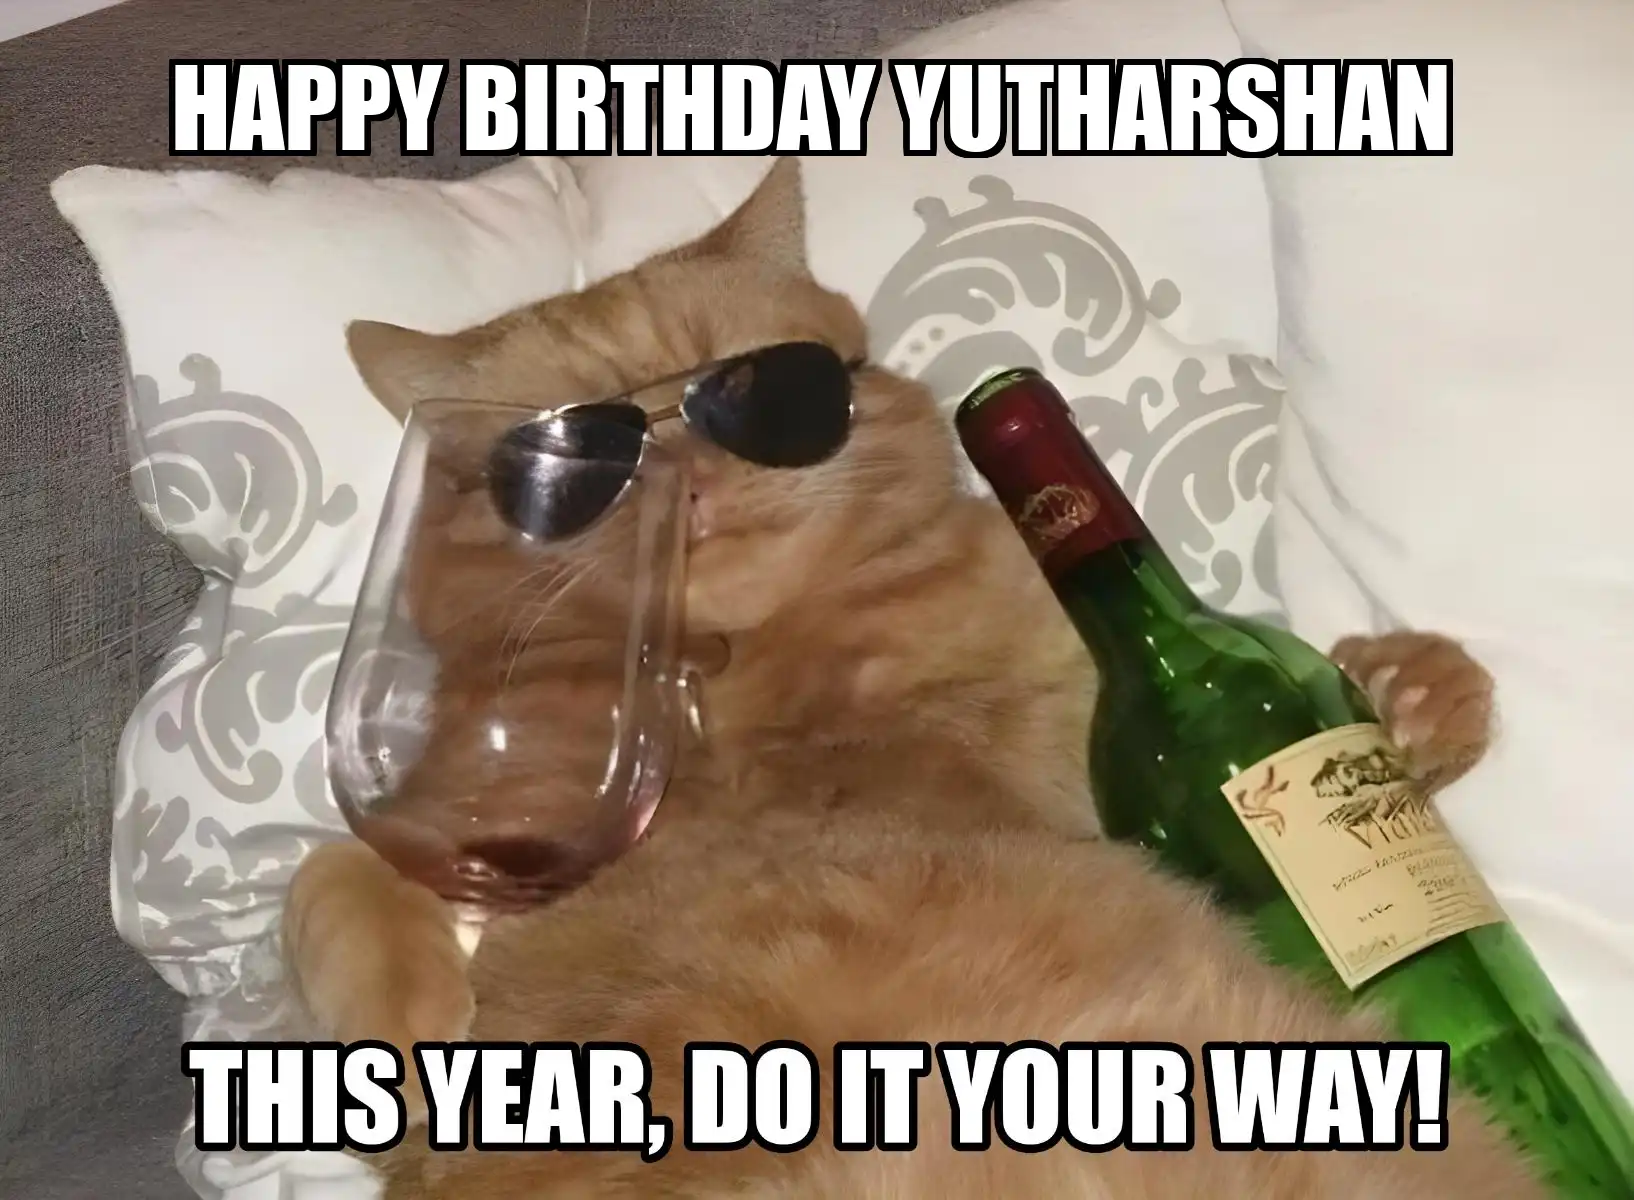 Happy Birthday Yutharshan This Year Do It Your Way Meme